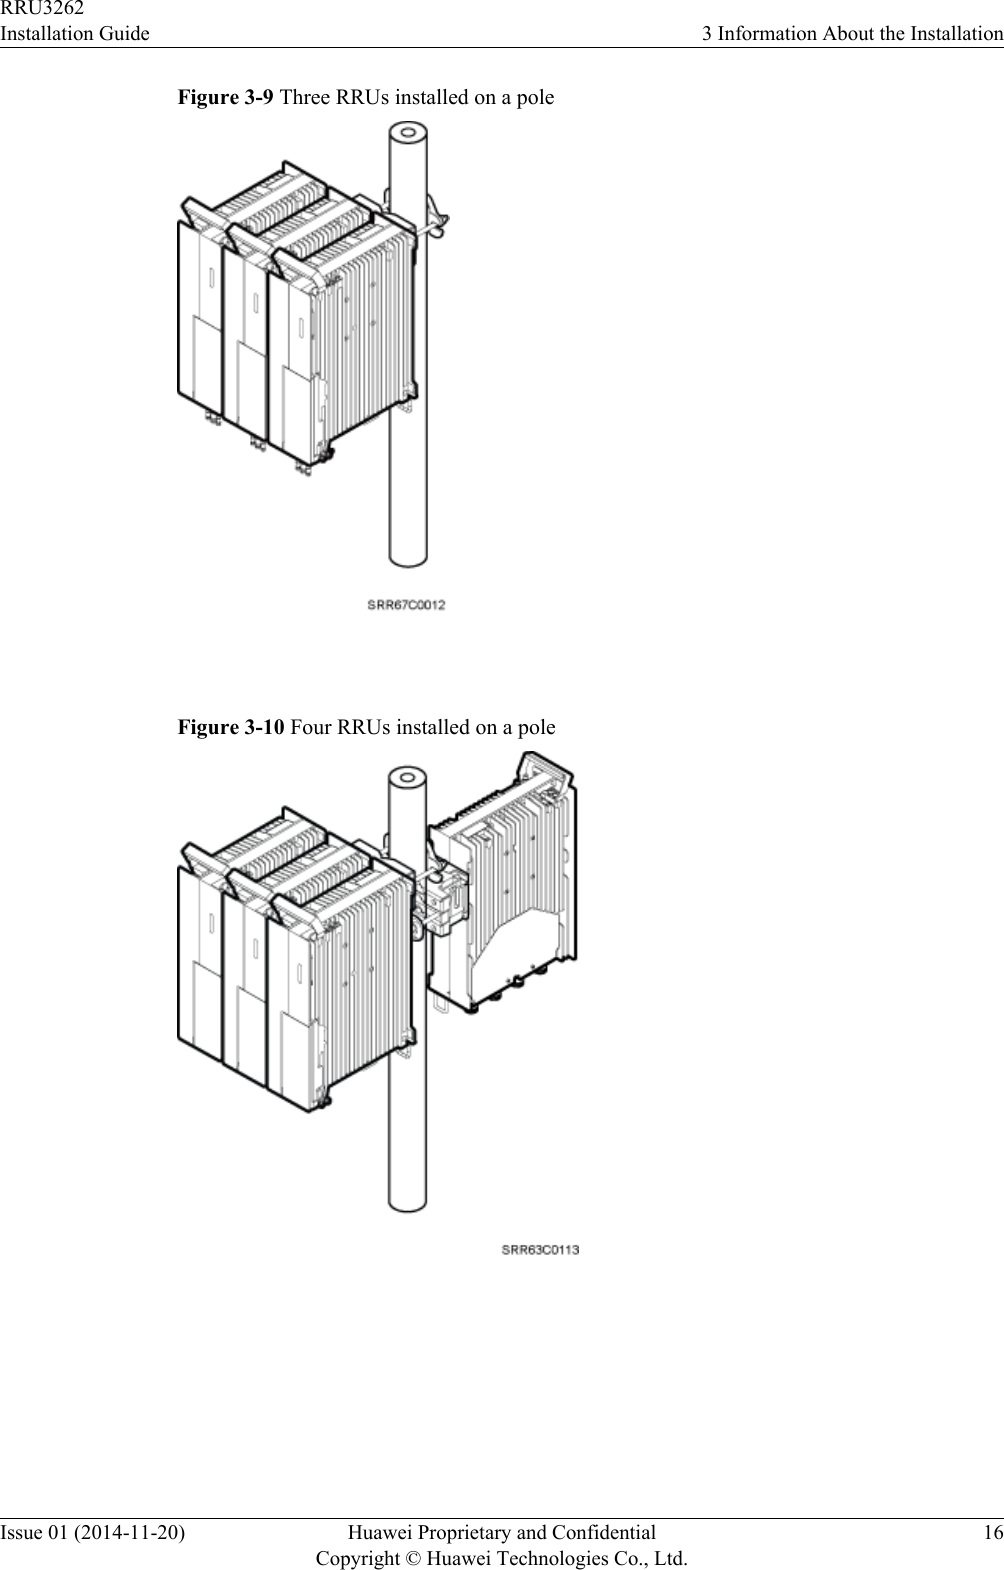 Figure 3-9 Three RRUs installed on a pole Figure 3-10 Four RRUs installed on a pole RRU3262Installation Guide 3 Information About the InstallationIssue 01 (2014-11-20) Huawei Proprietary and ConfidentialCopyright © Huawei Technologies Co., Ltd.16